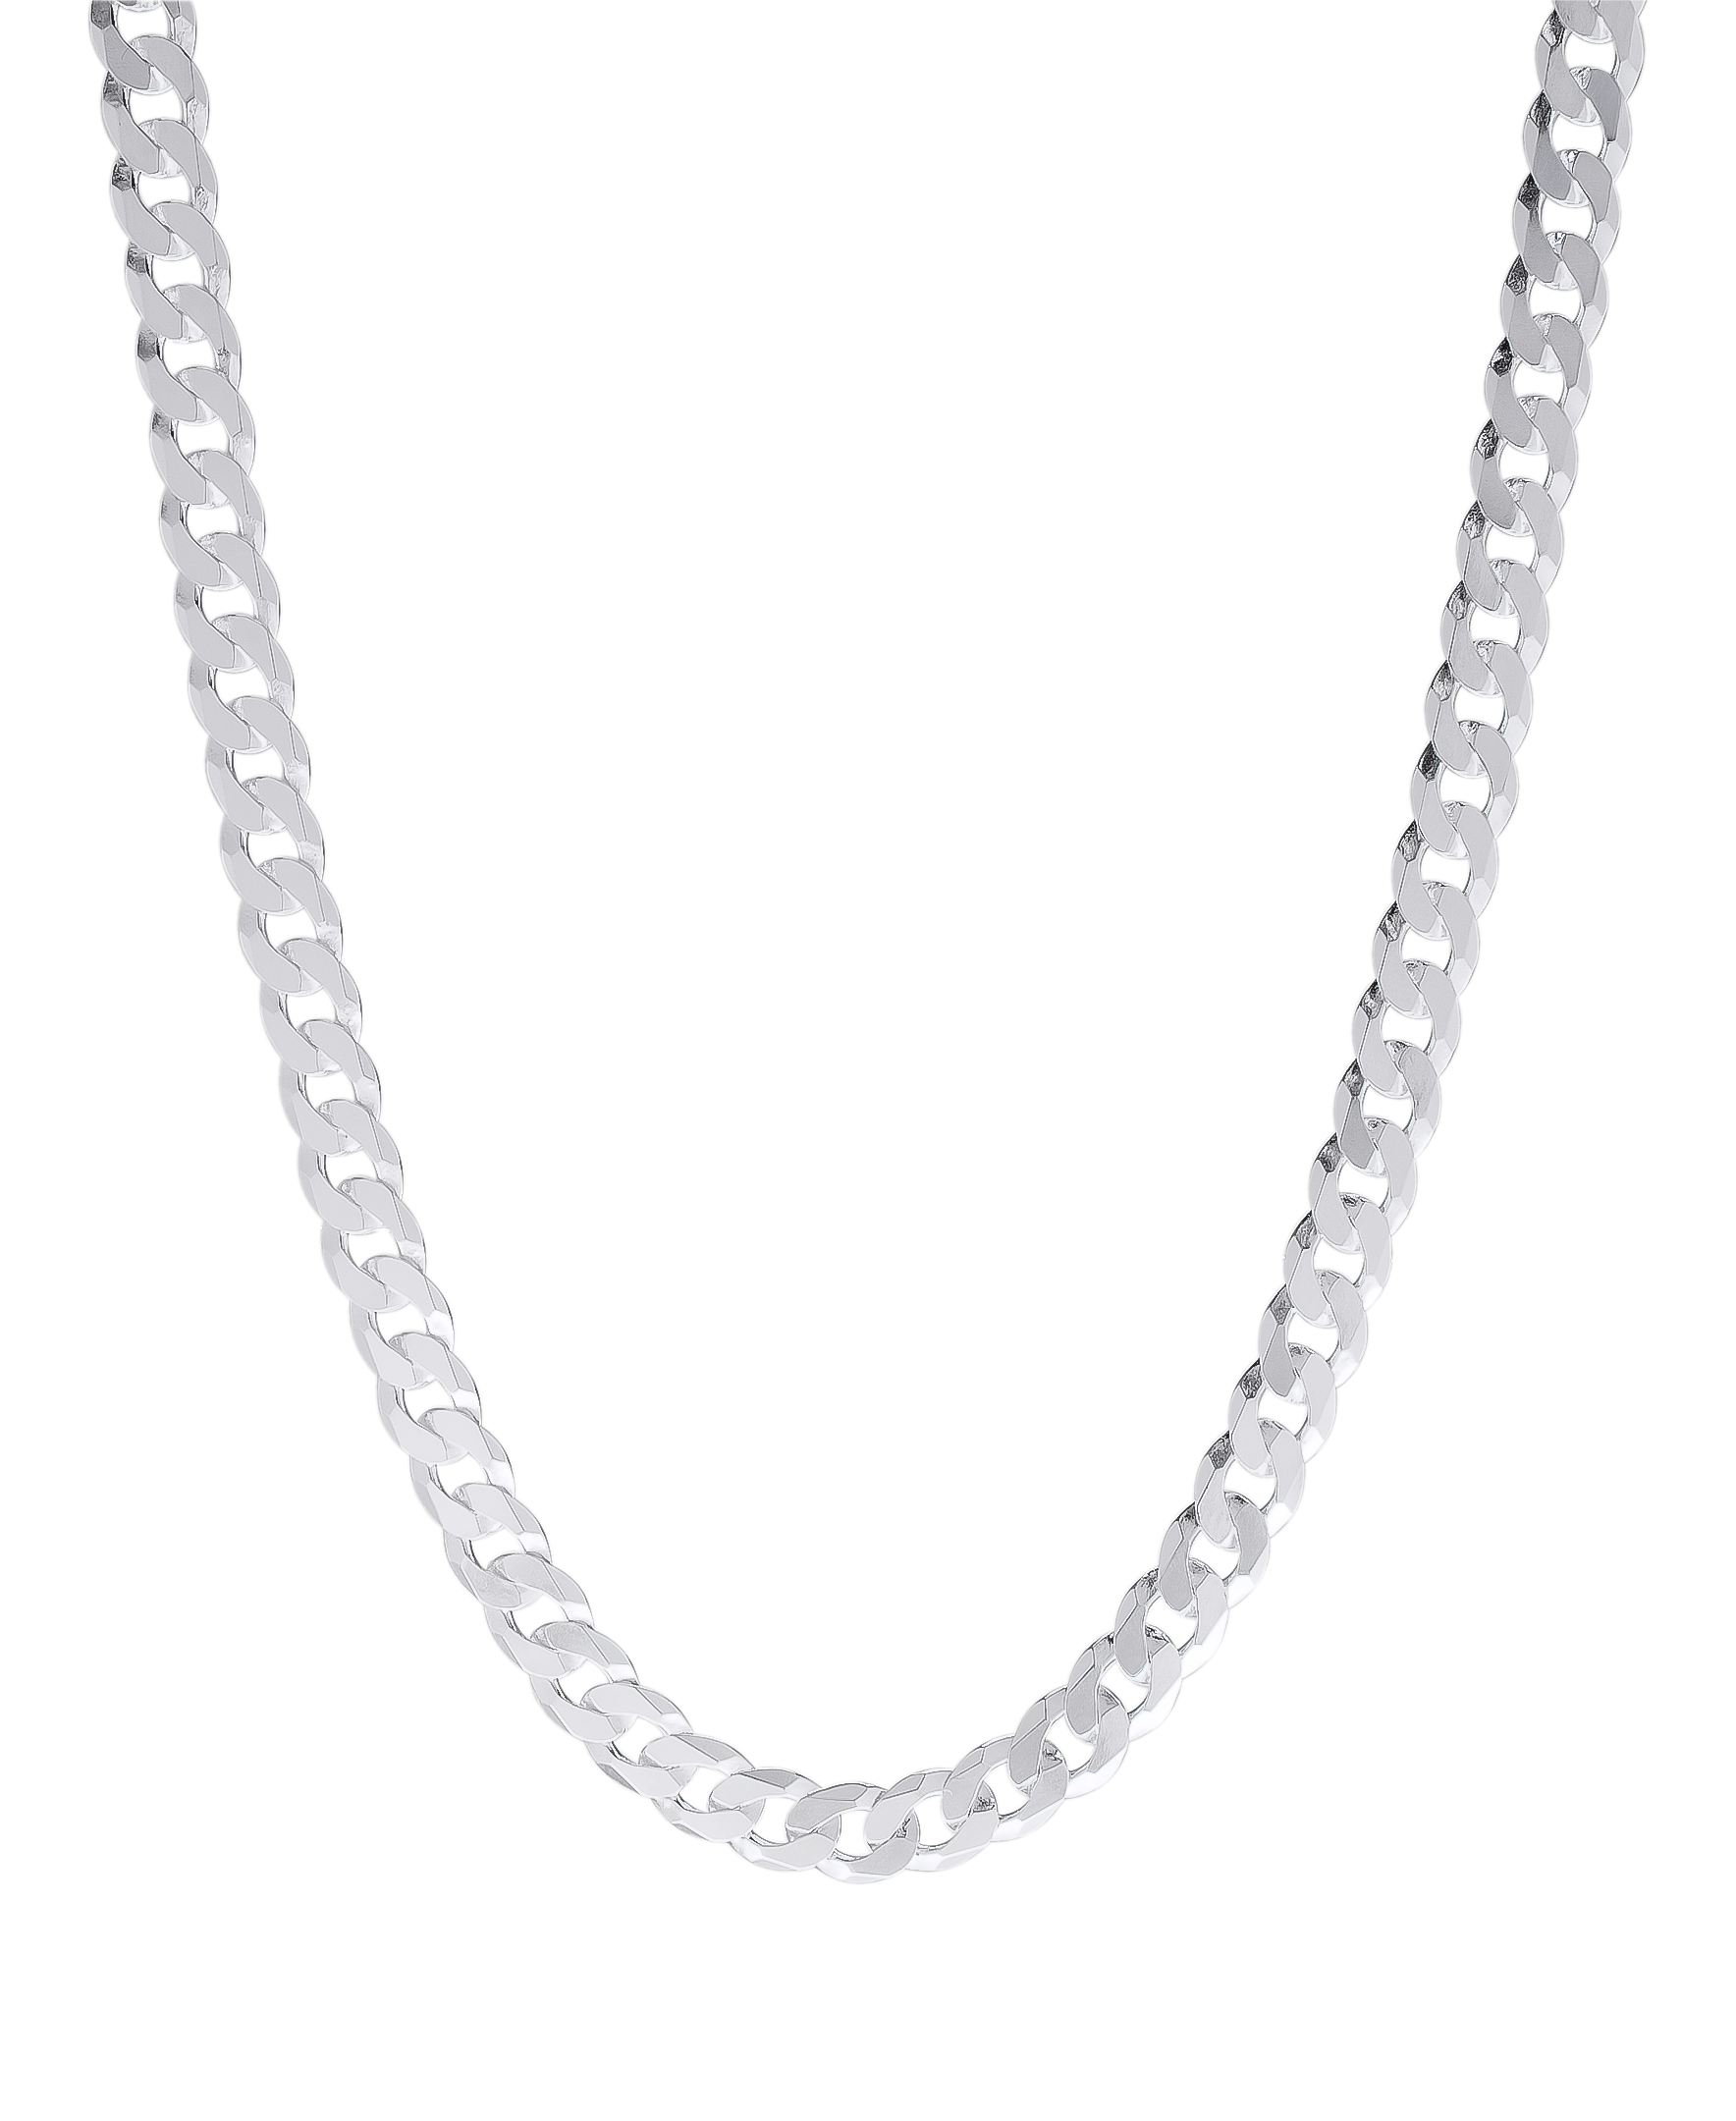 Sterling Silver PAVE CURB Necklace in 30", 4.6mm